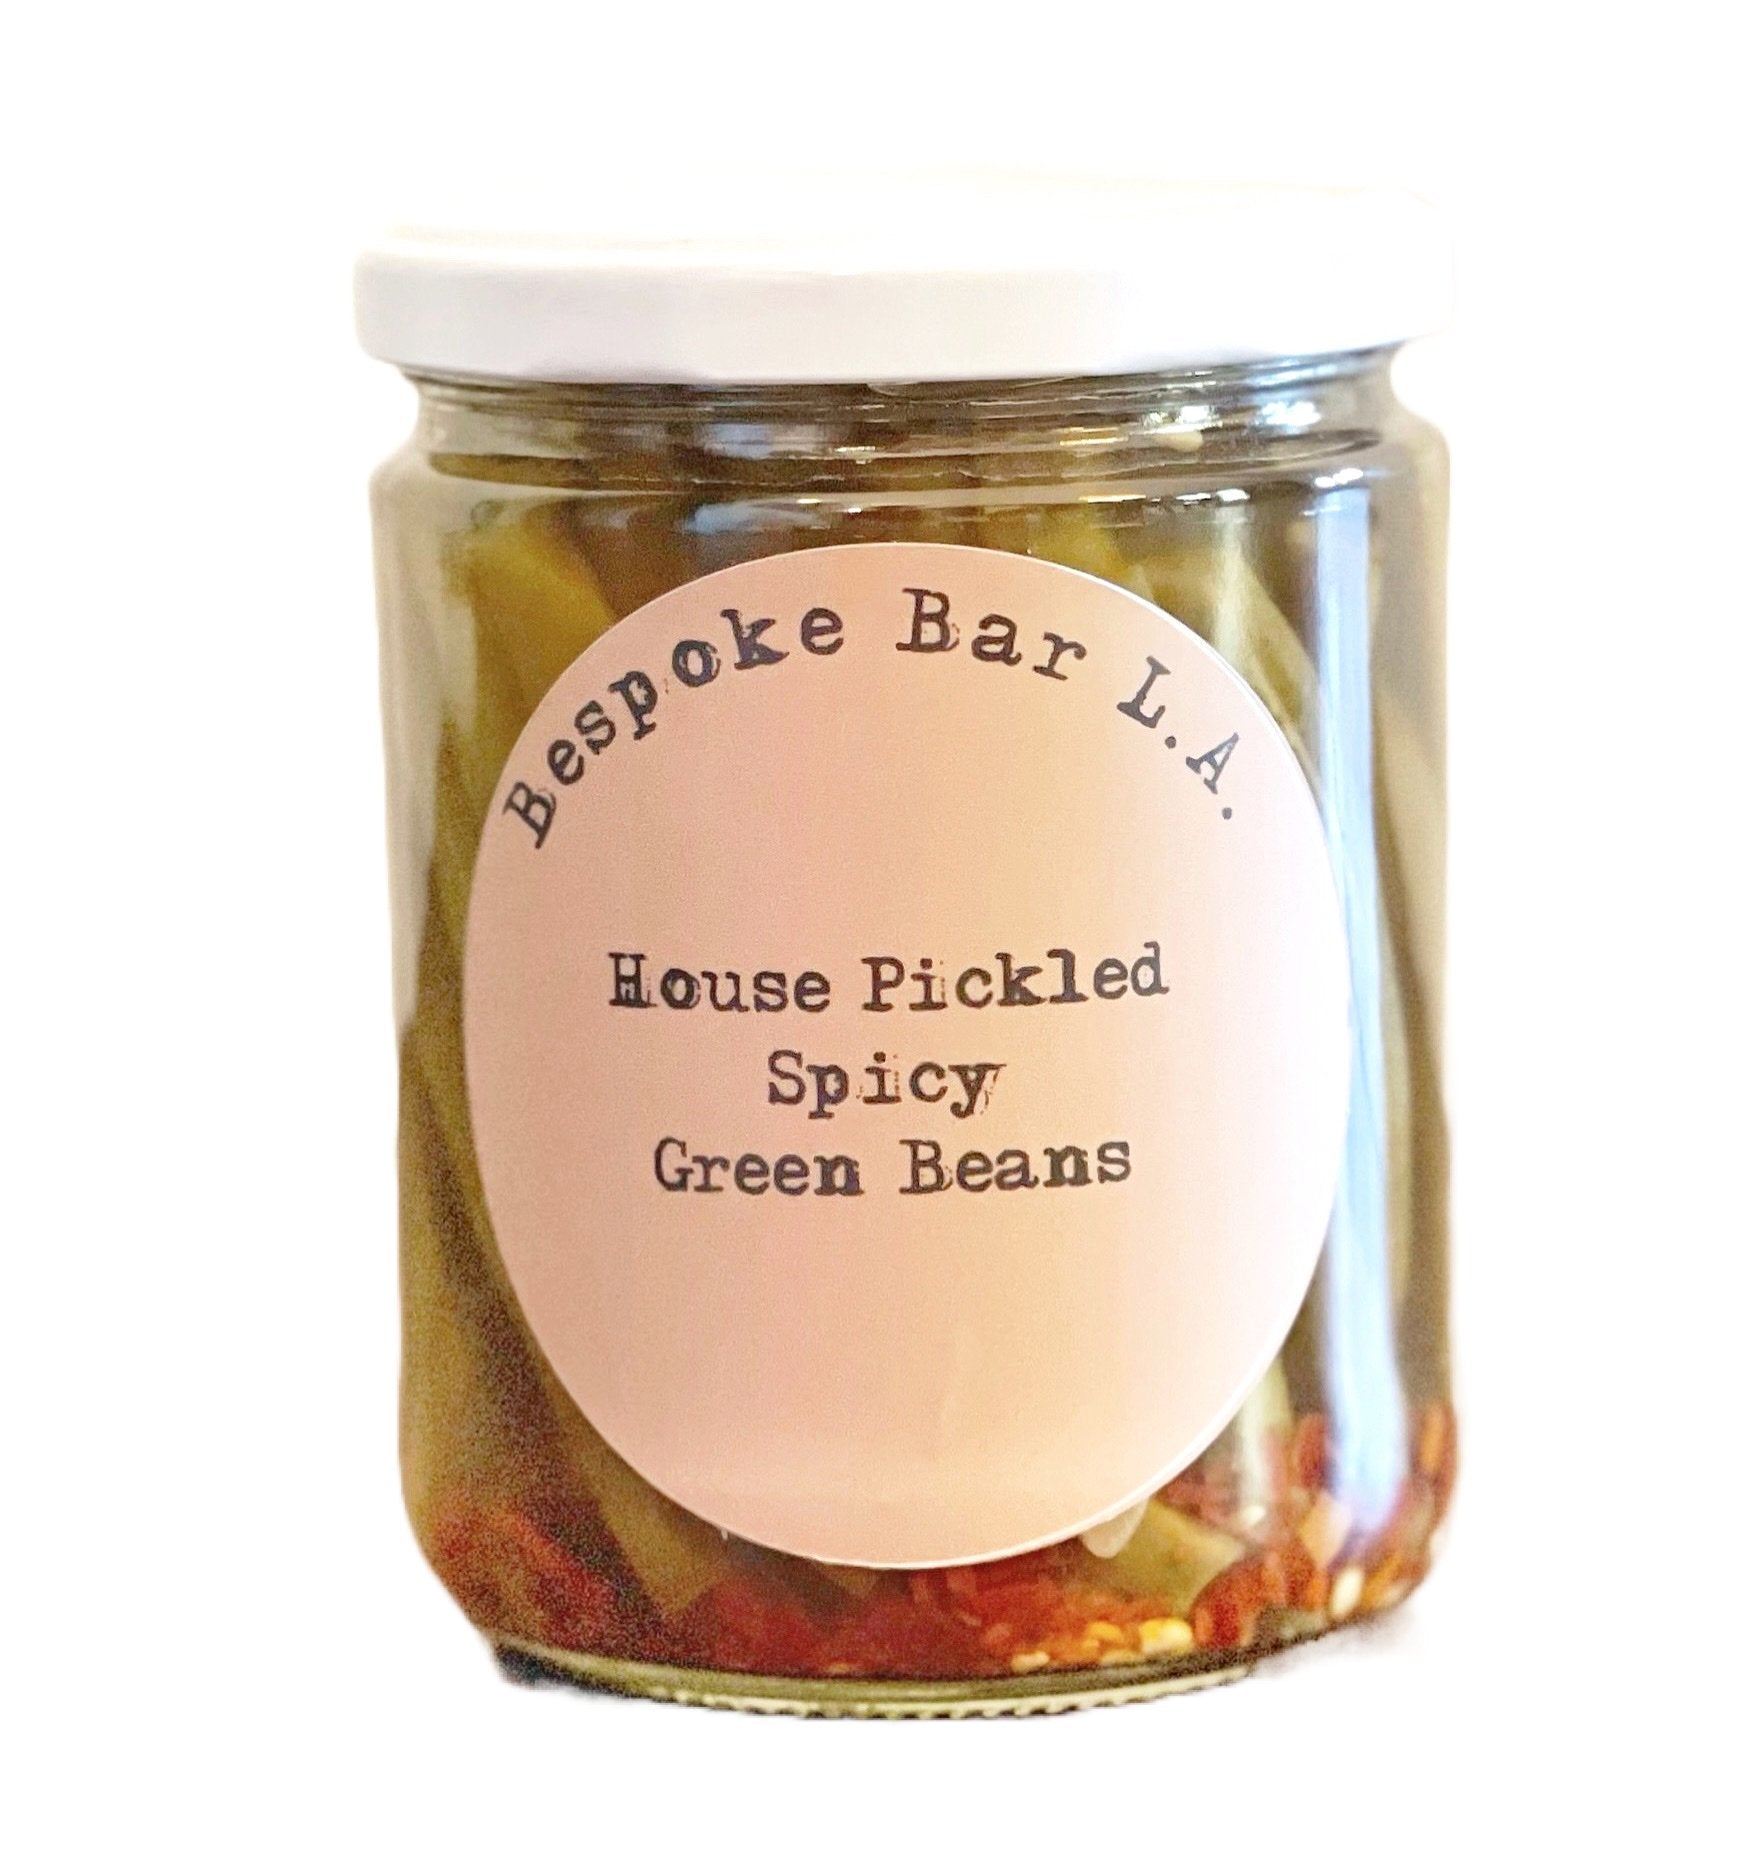 House-Pickled Spicy Green Beans - Bespoke Bar L.A.